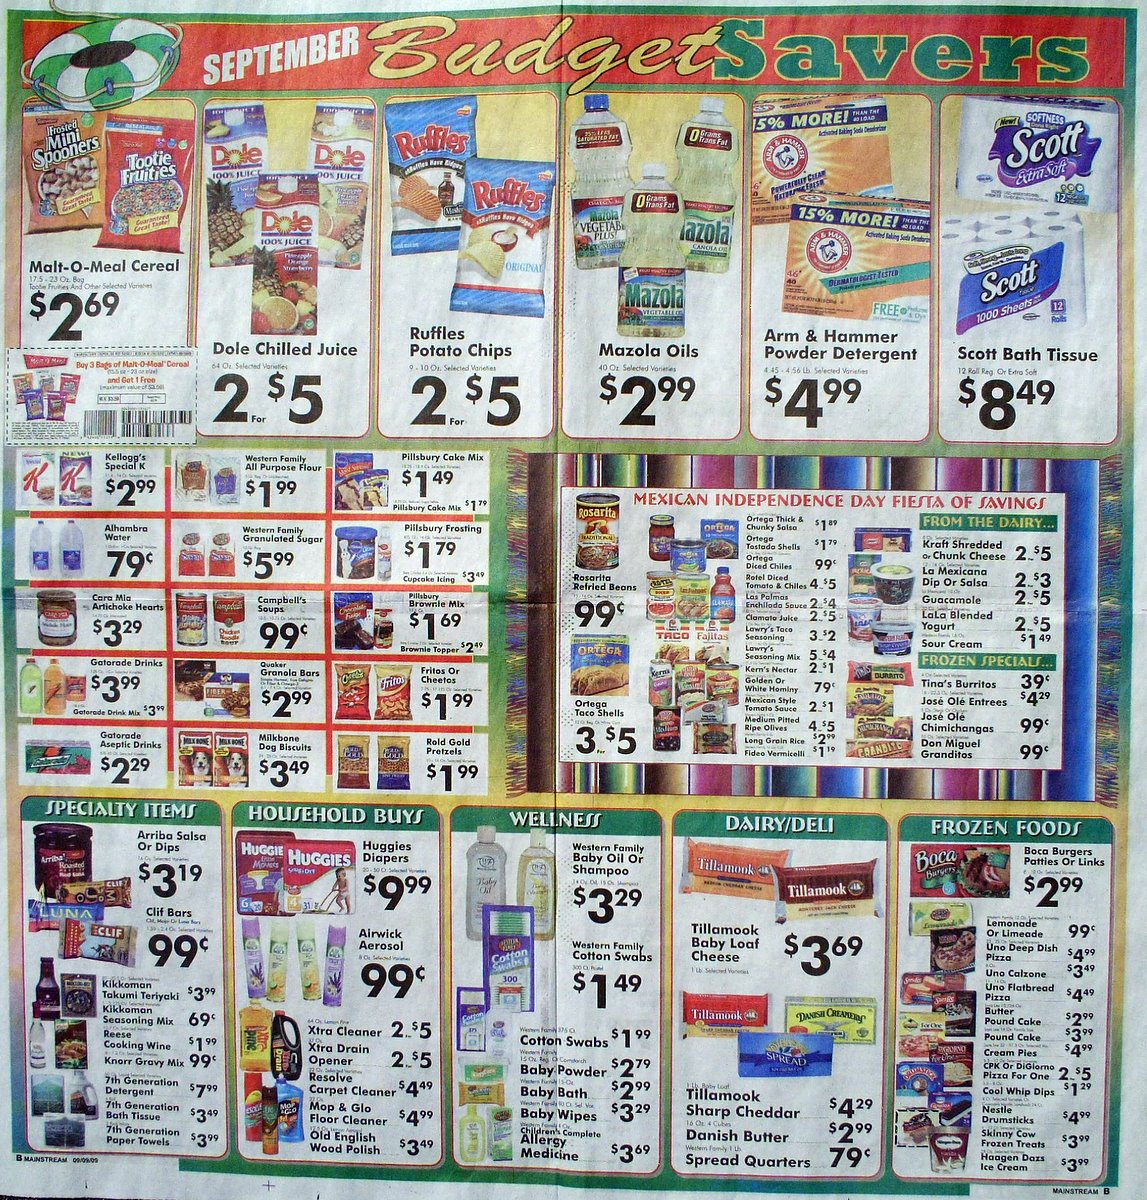 Big Trees Market Weekly Ad for September 9-15, 2009